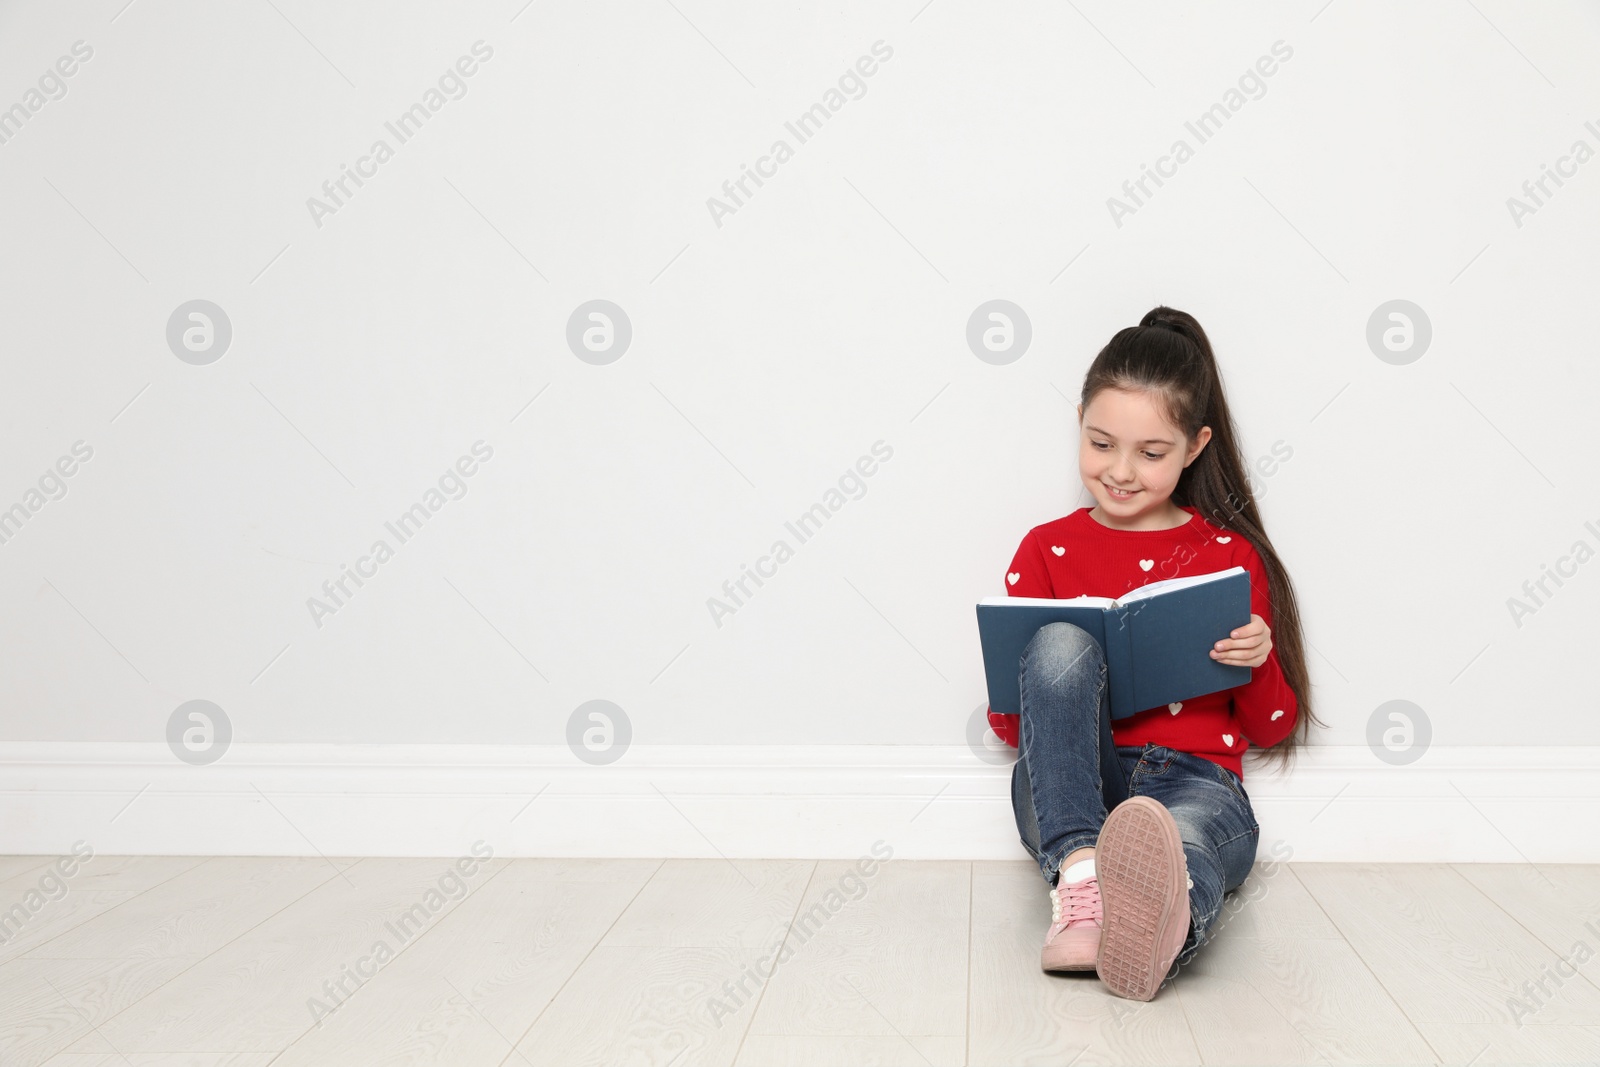 Photo of Cute little girl reading book on floor near white wall, space for text